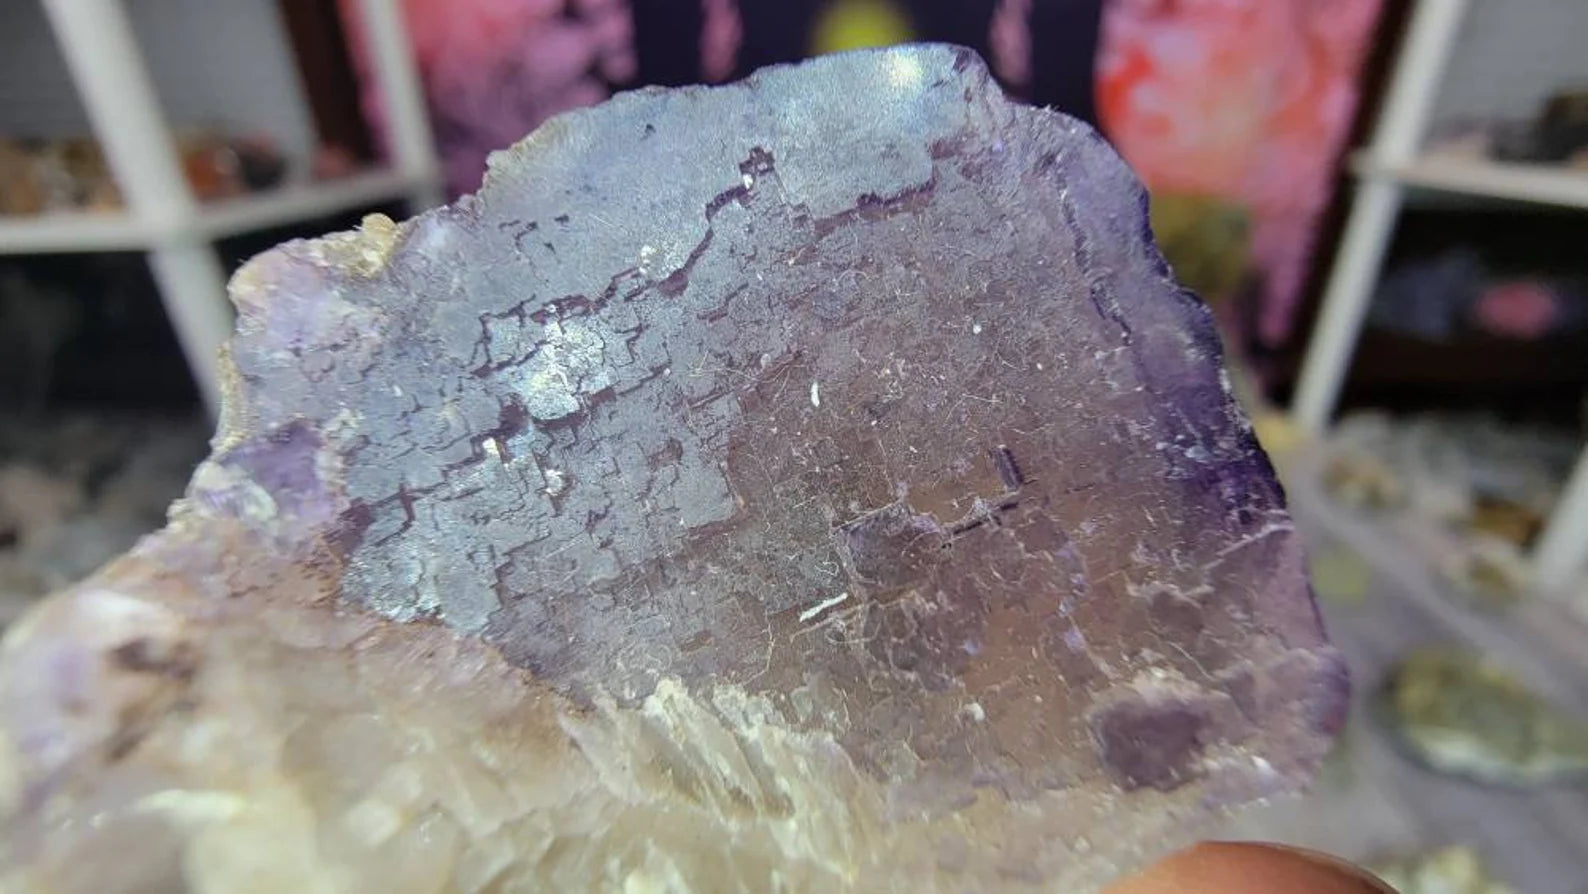 Intricate Details on Cubic Fluorite from Mexico